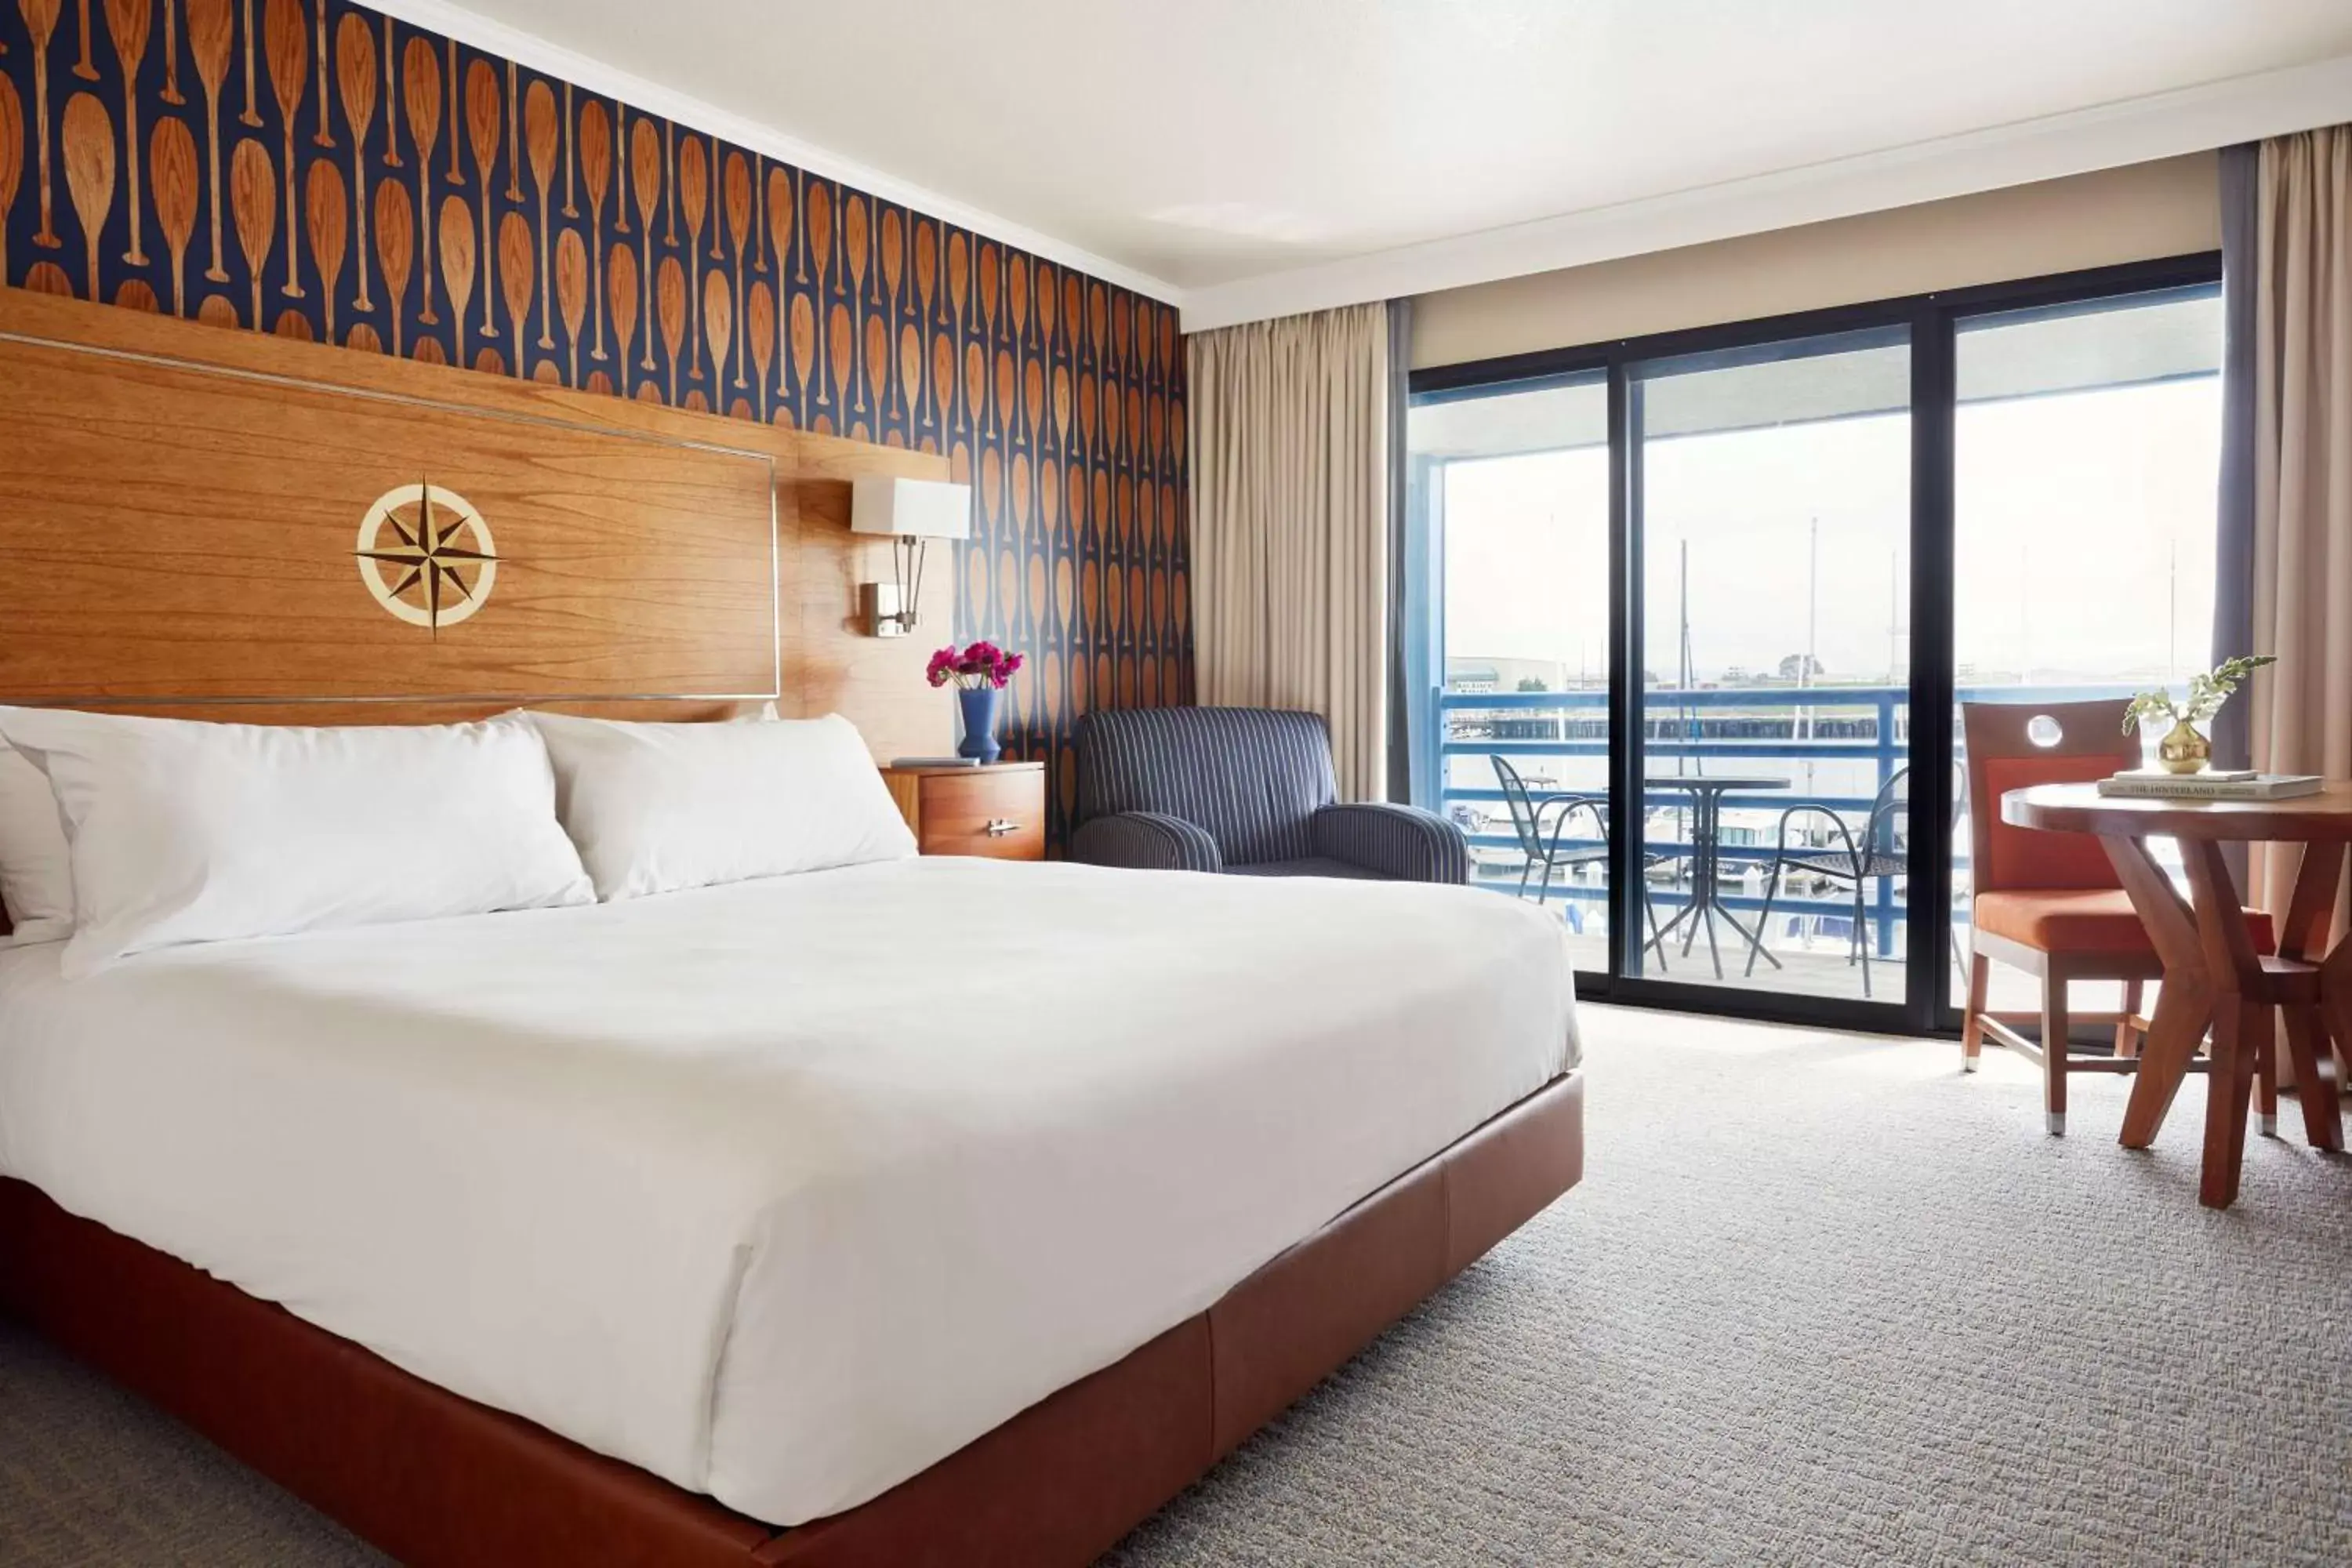 King Room with Balcony and Marina View in Waterfront Hotel, part of JdV by Hyatt